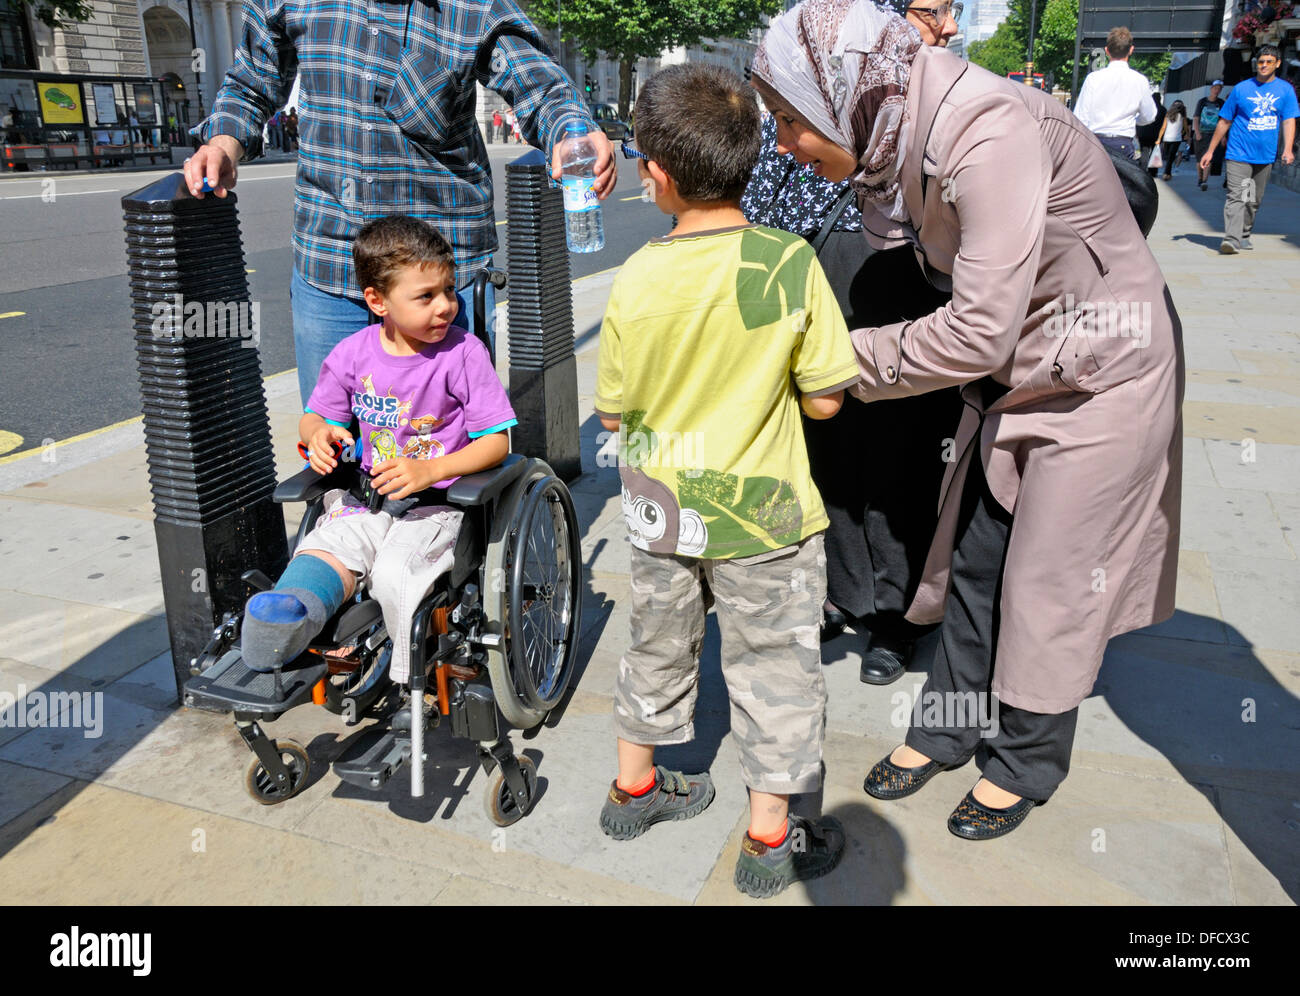 London, England, UK. Middle eastern family with a young boy in a wheelchair. Stock Photo